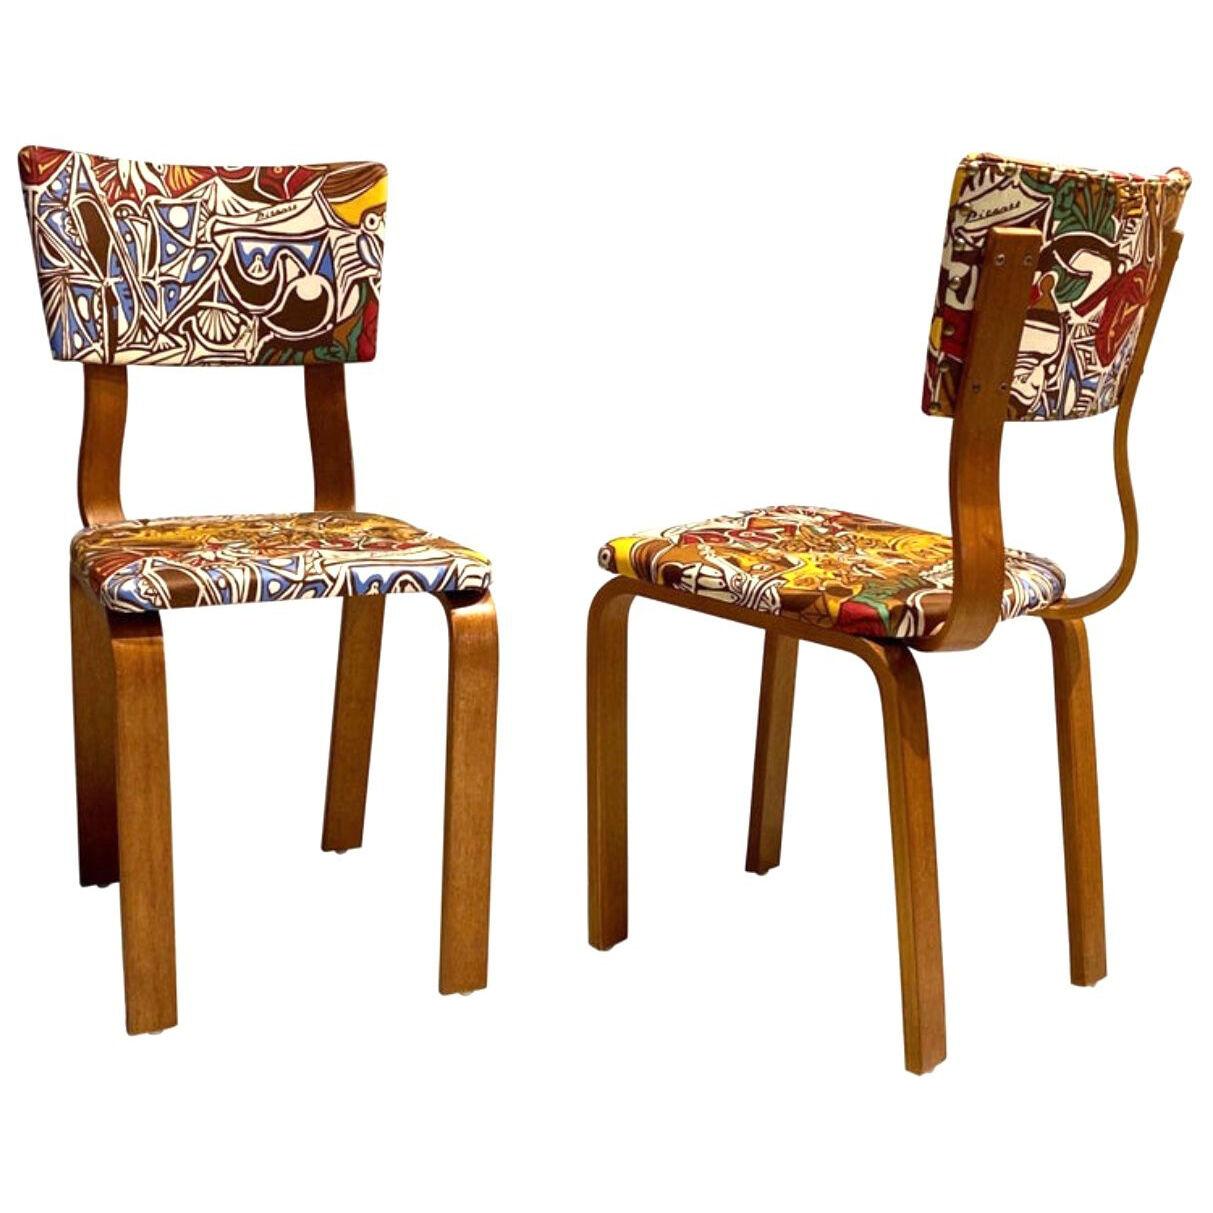 Pair of Joe Atkinson Chairs for Thonet, Pablo Picasso LTD Edition Fabric 1940s 